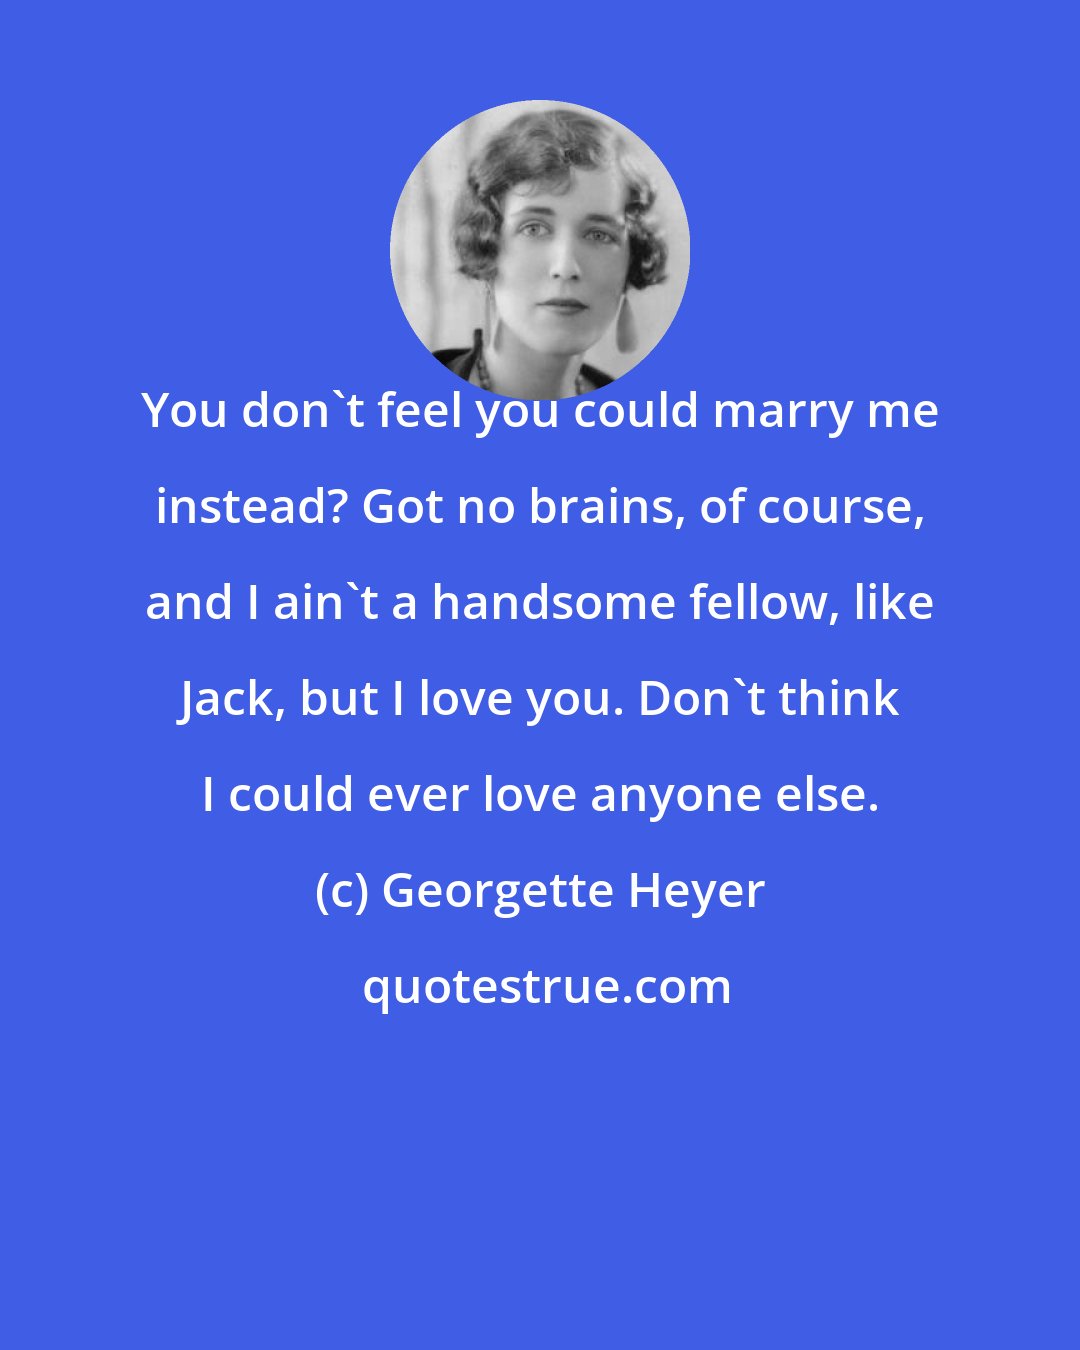 Georgette Heyer: You don't feel you could marry me instead? Got no brains, of course, and I ain't a handsome fellow, like Jack, but I love you. Don't think I could ever love anyone else.